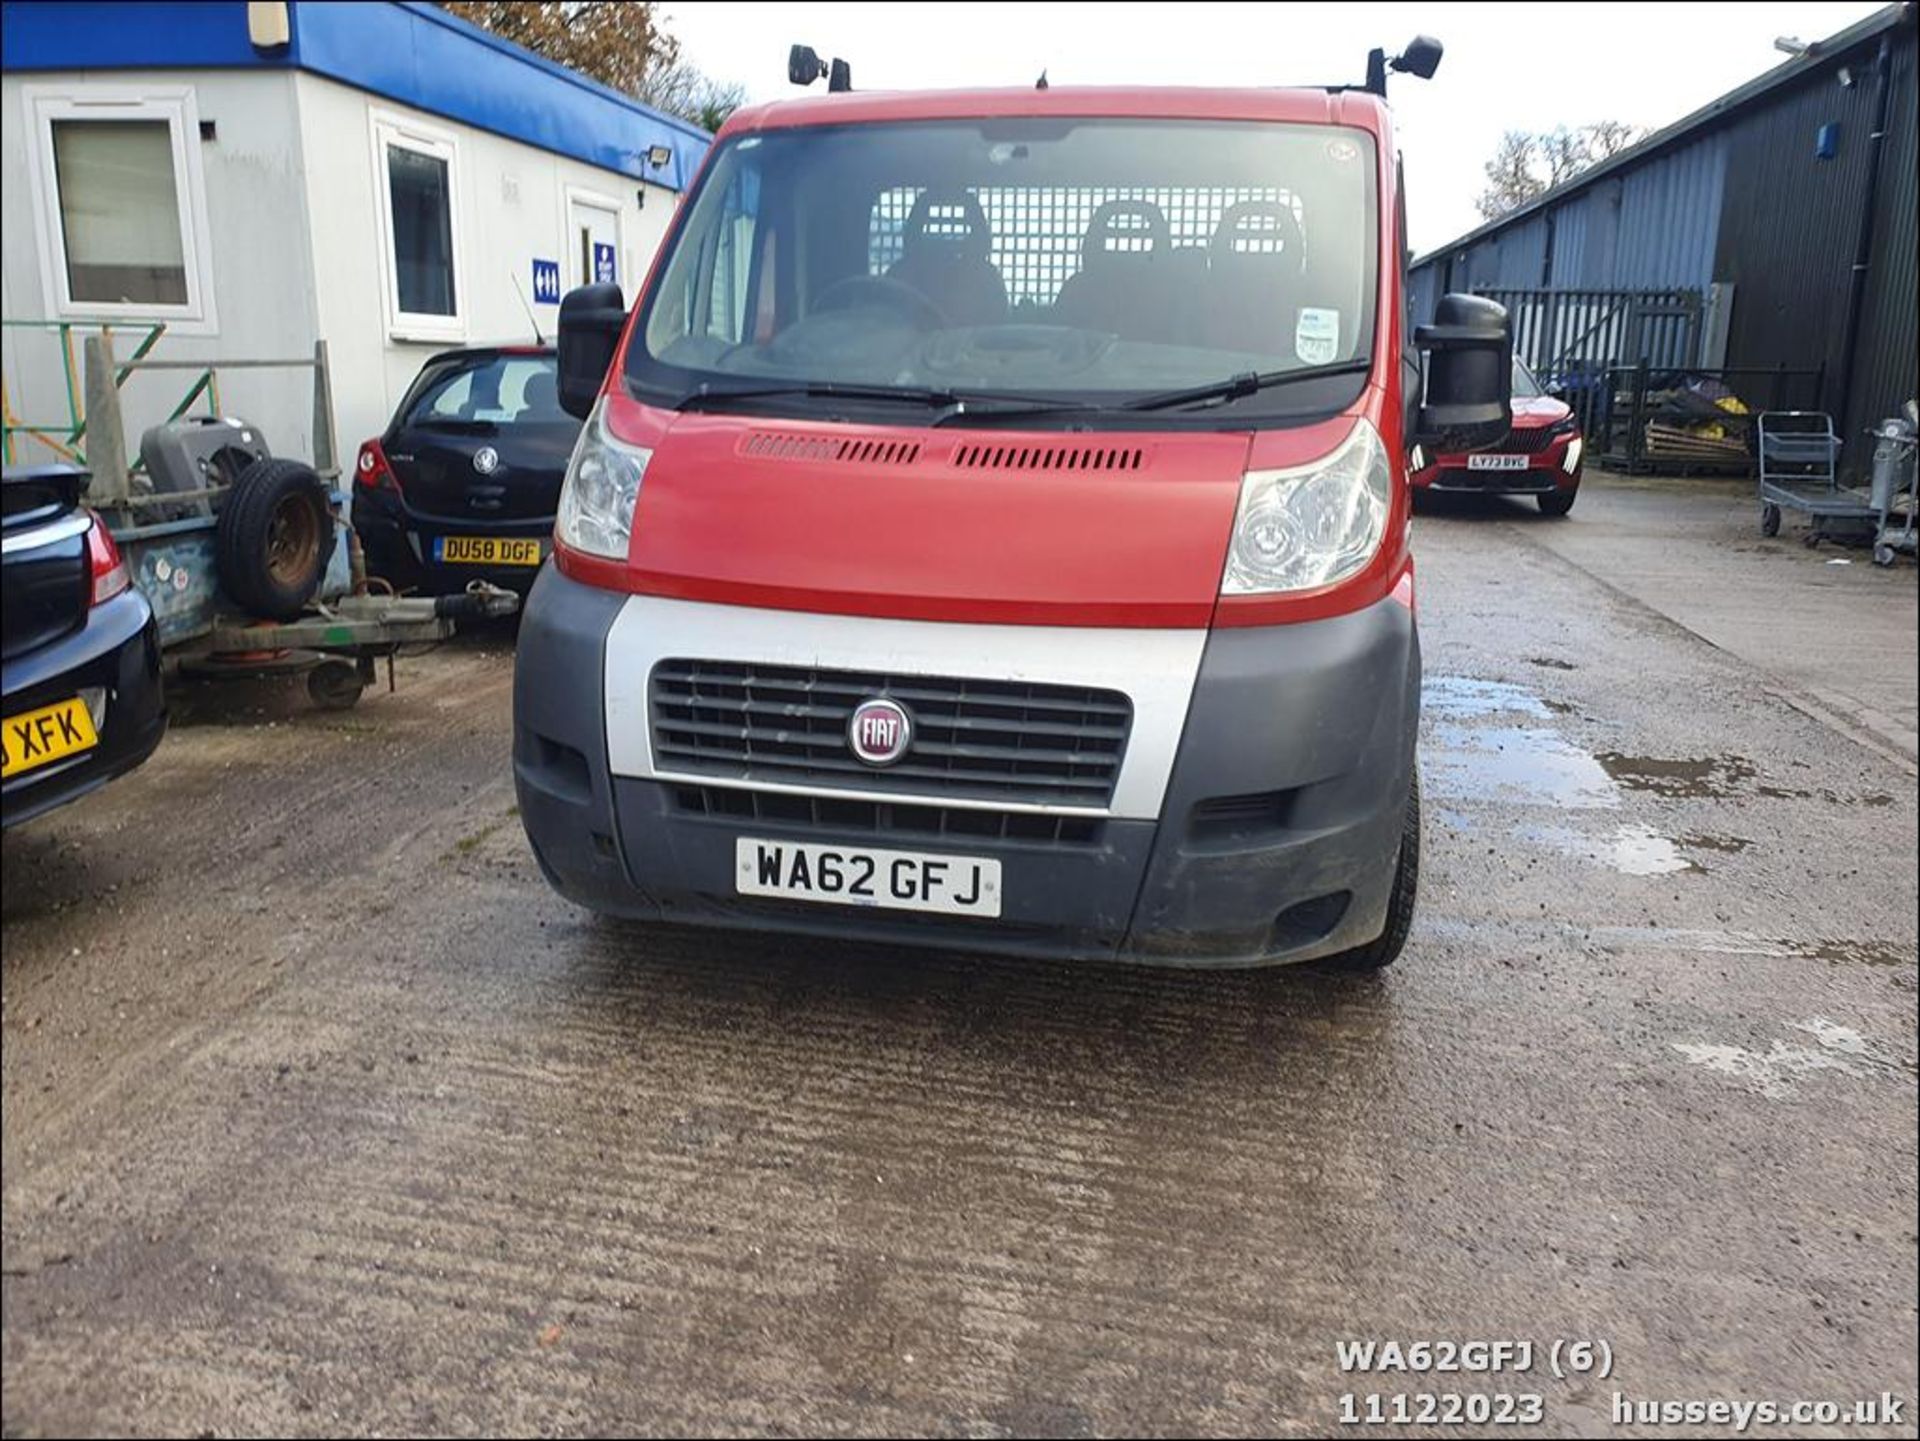 12/62 FIAT DUCATO 35 MULTIJET - 2287cc 2.dr Flat Bed (Red) - Image 7 of 52